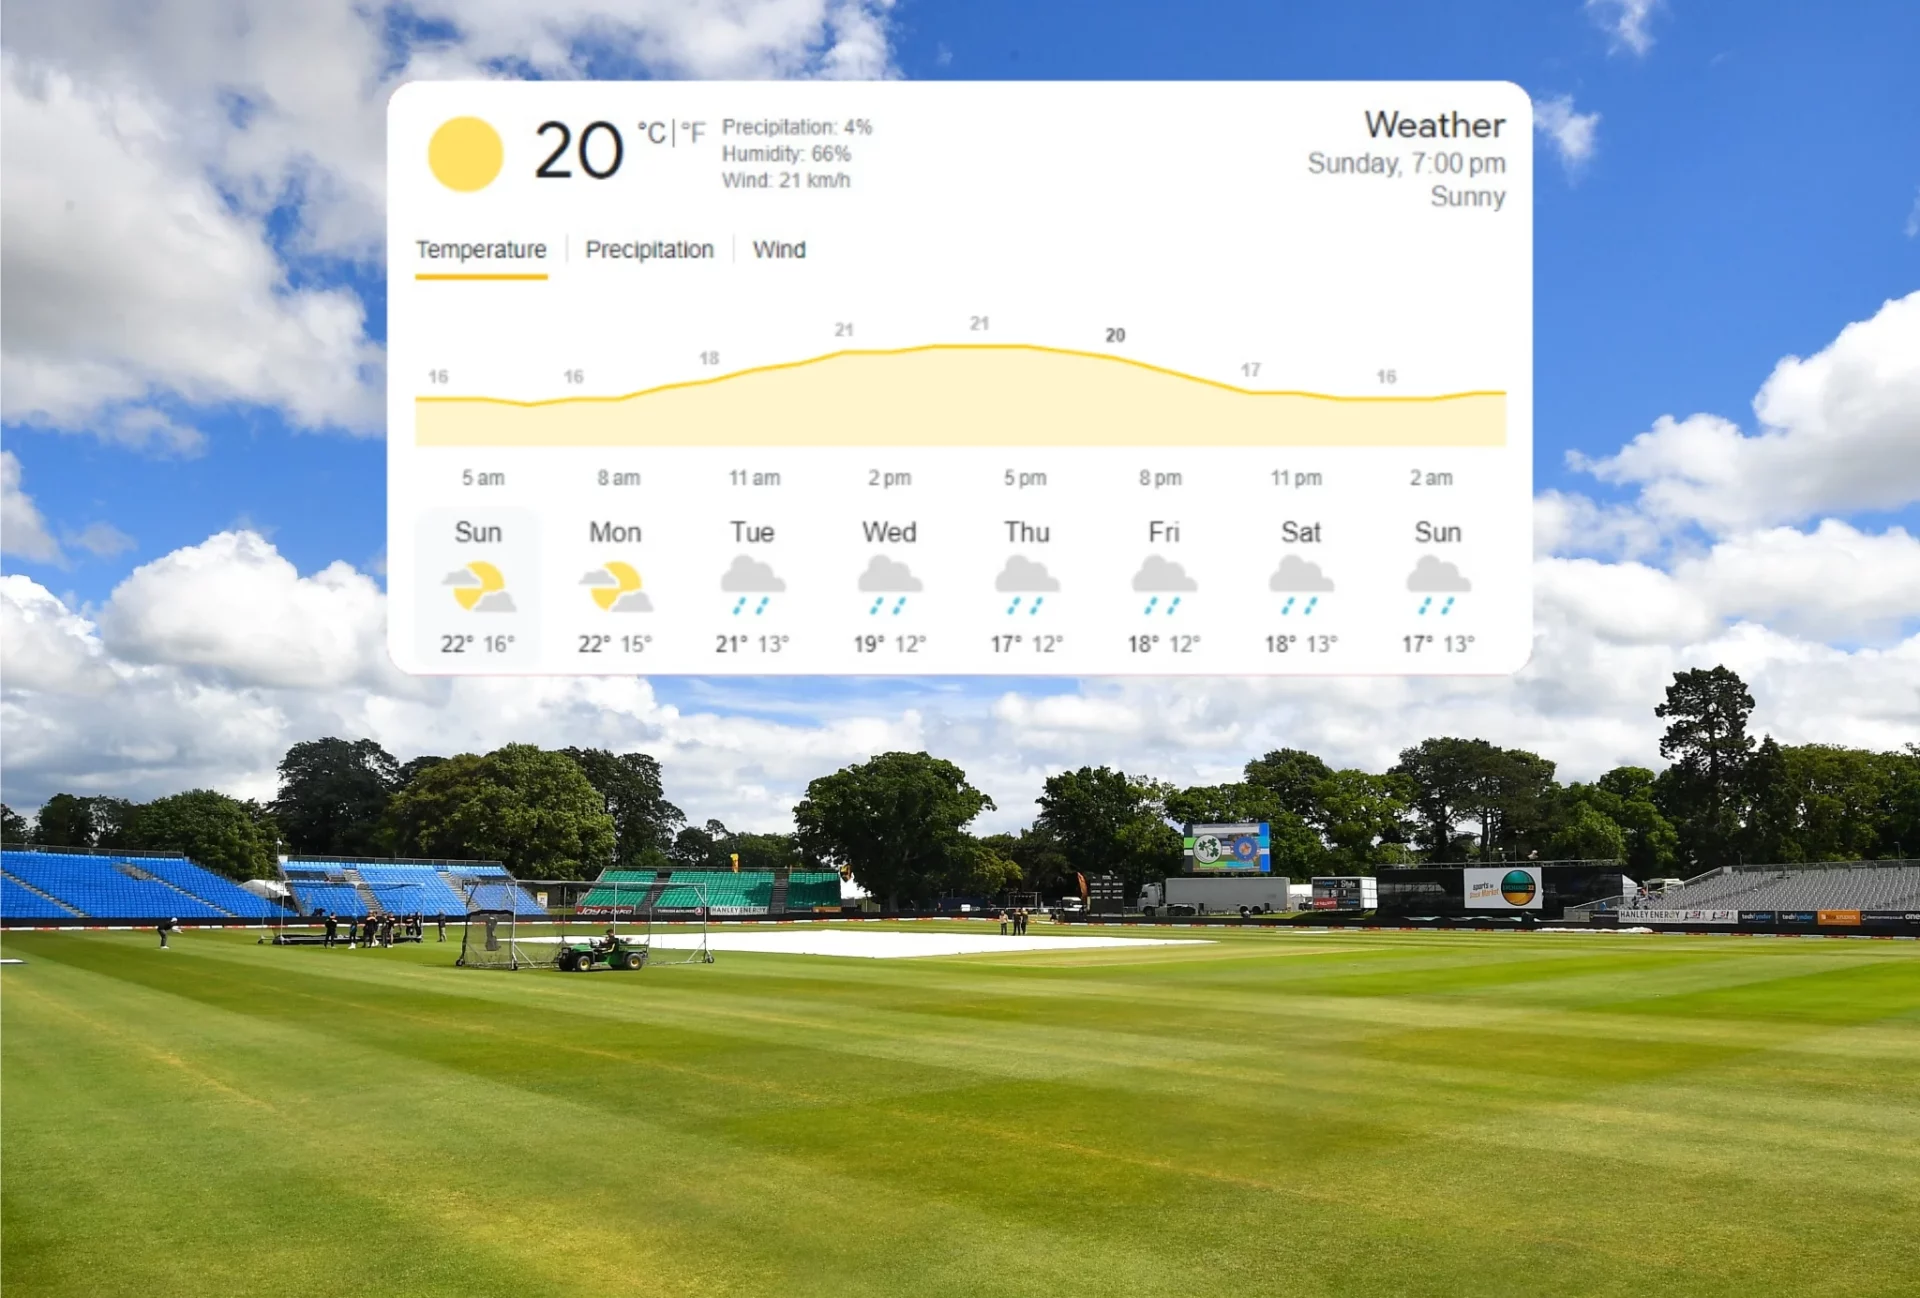 IRE vs IND 2nd T20I - Weather Report